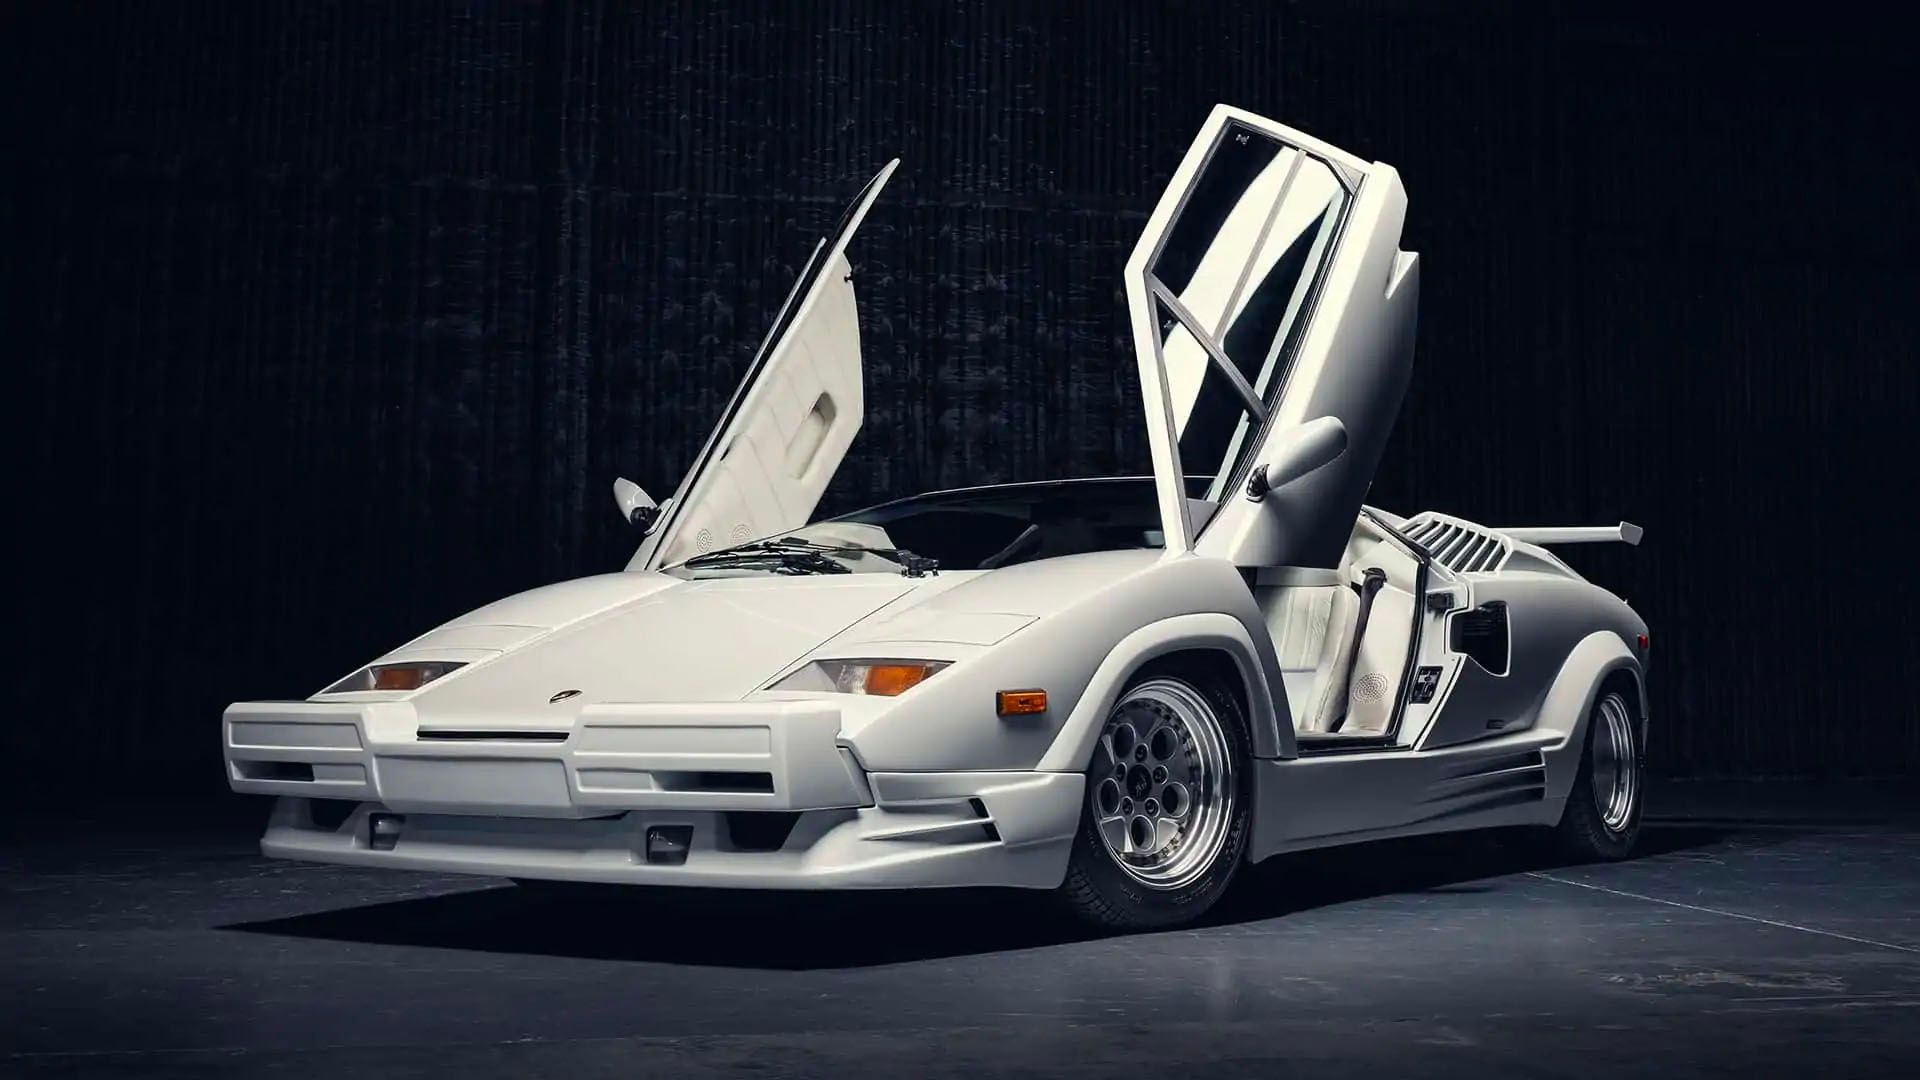 The Wolf of Wall Street Lamborghini Countach will be put up for auction